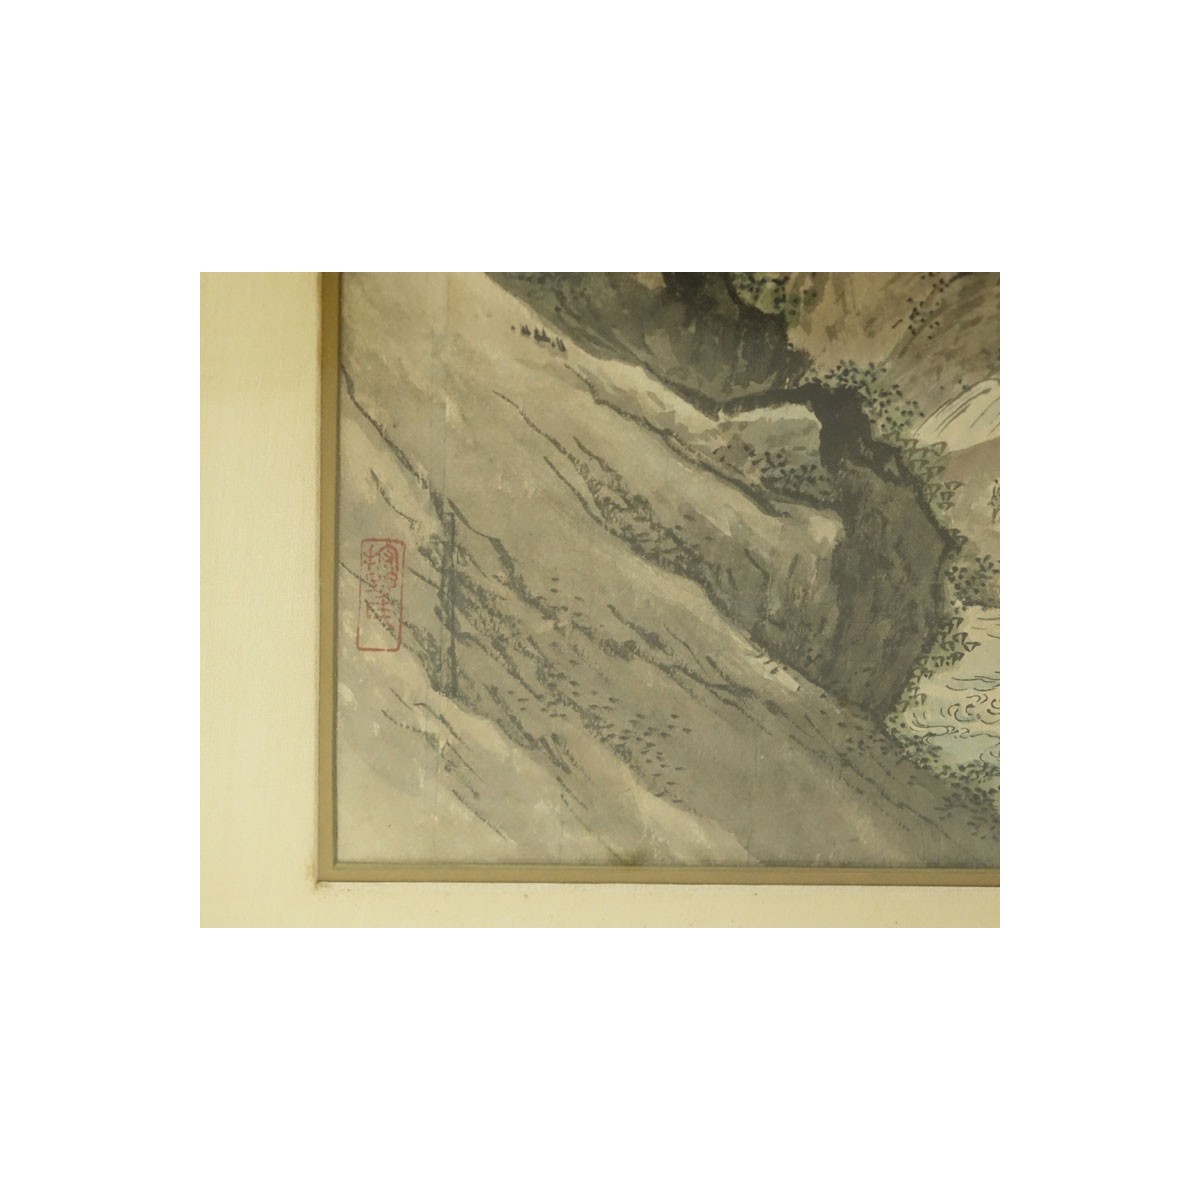 Large Antique Japanese Watercolor Scroll Painting, Landscape Scene. Signed. Toning and spotting, cr